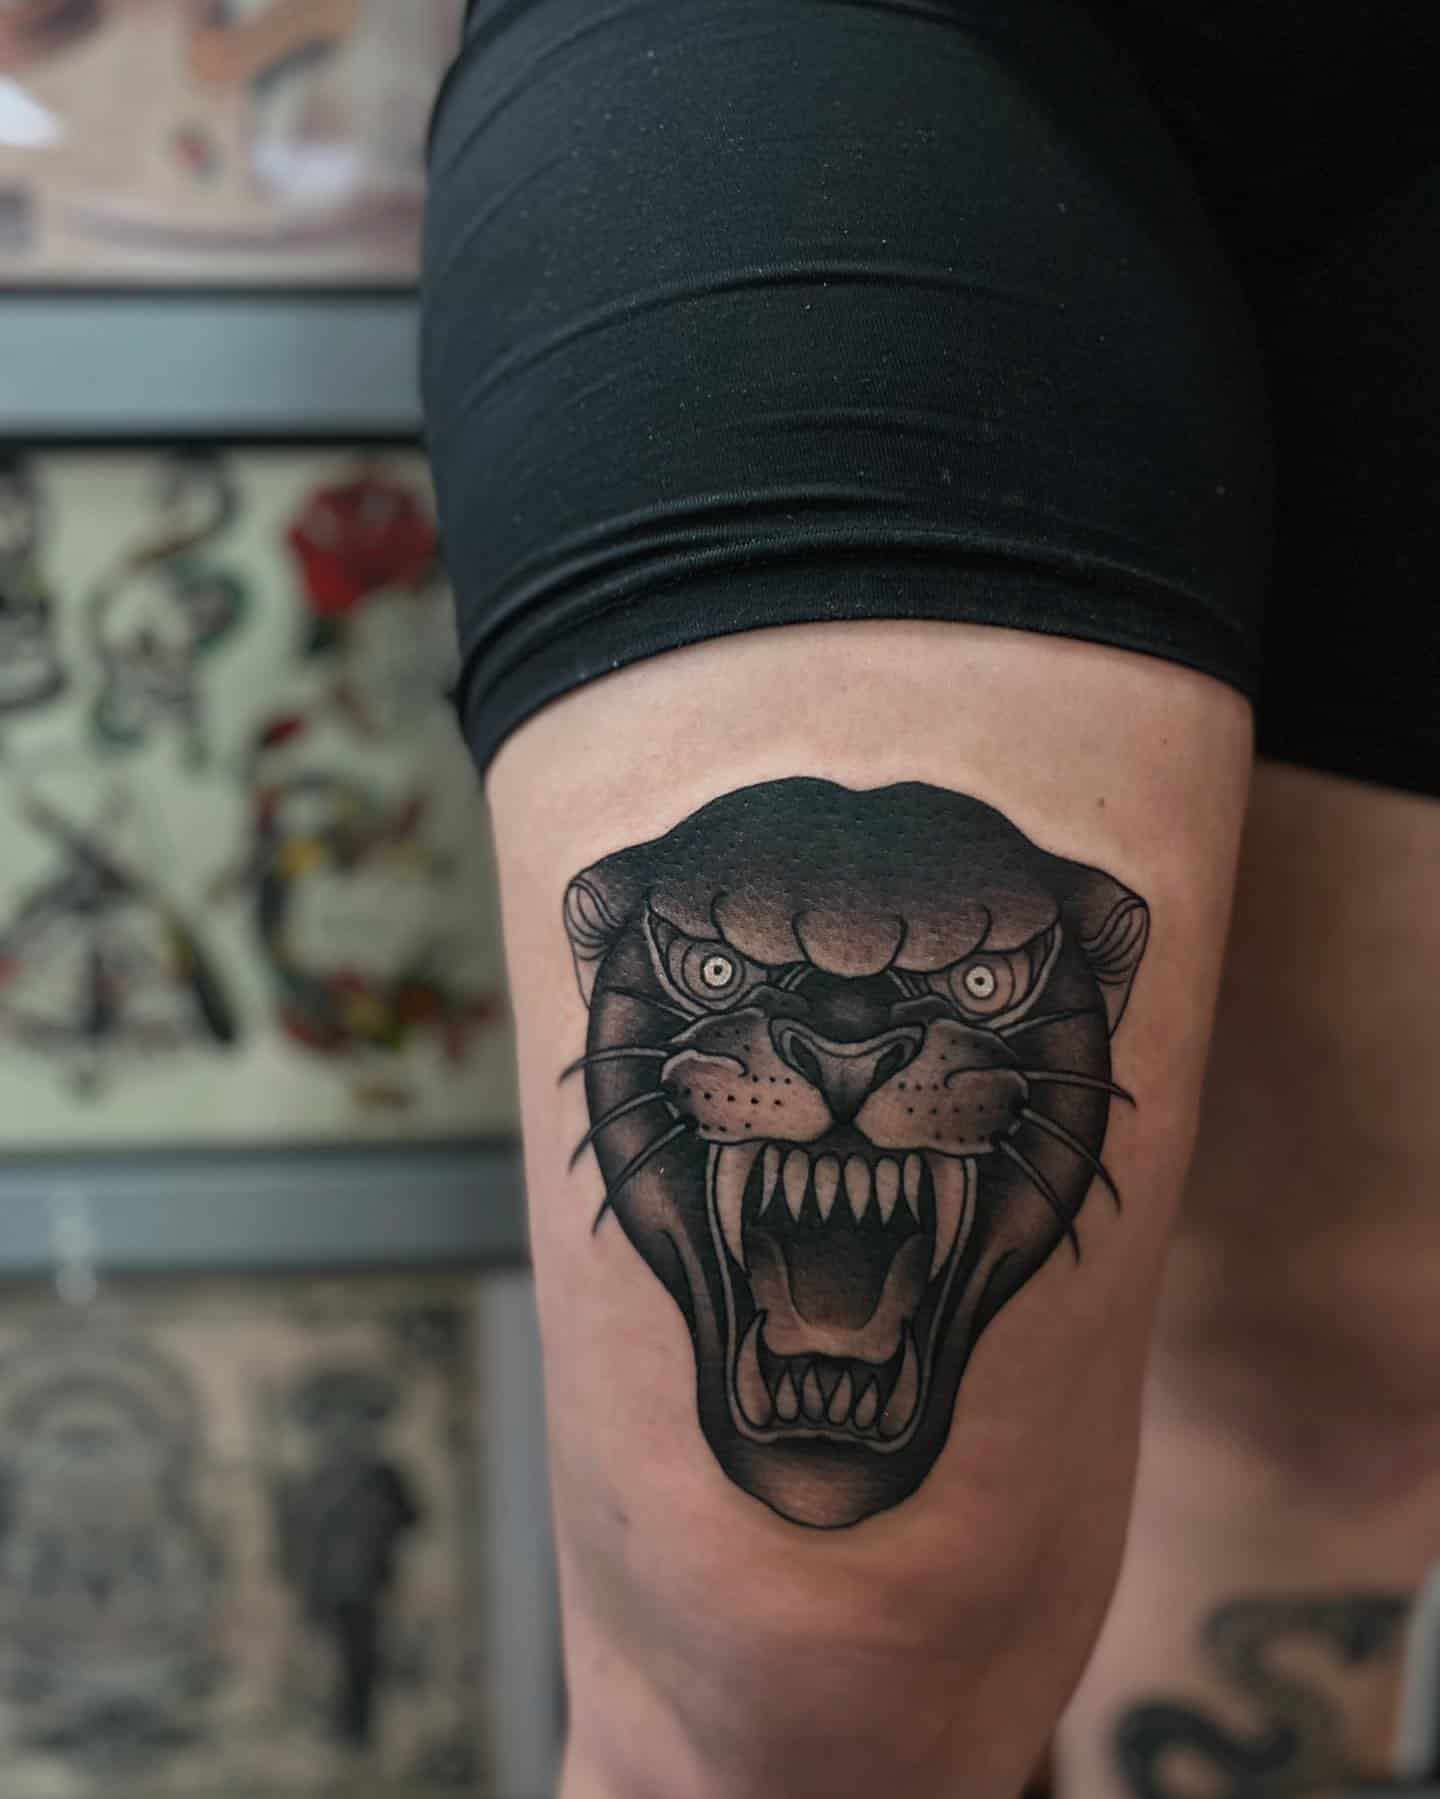 Tattoo Snob on Instagram Panther Love tattoo by amandaslatertattoo at  lake  Traditional hand tattoo Traditional tattoo inspiration  Traditional tattoo sleeve